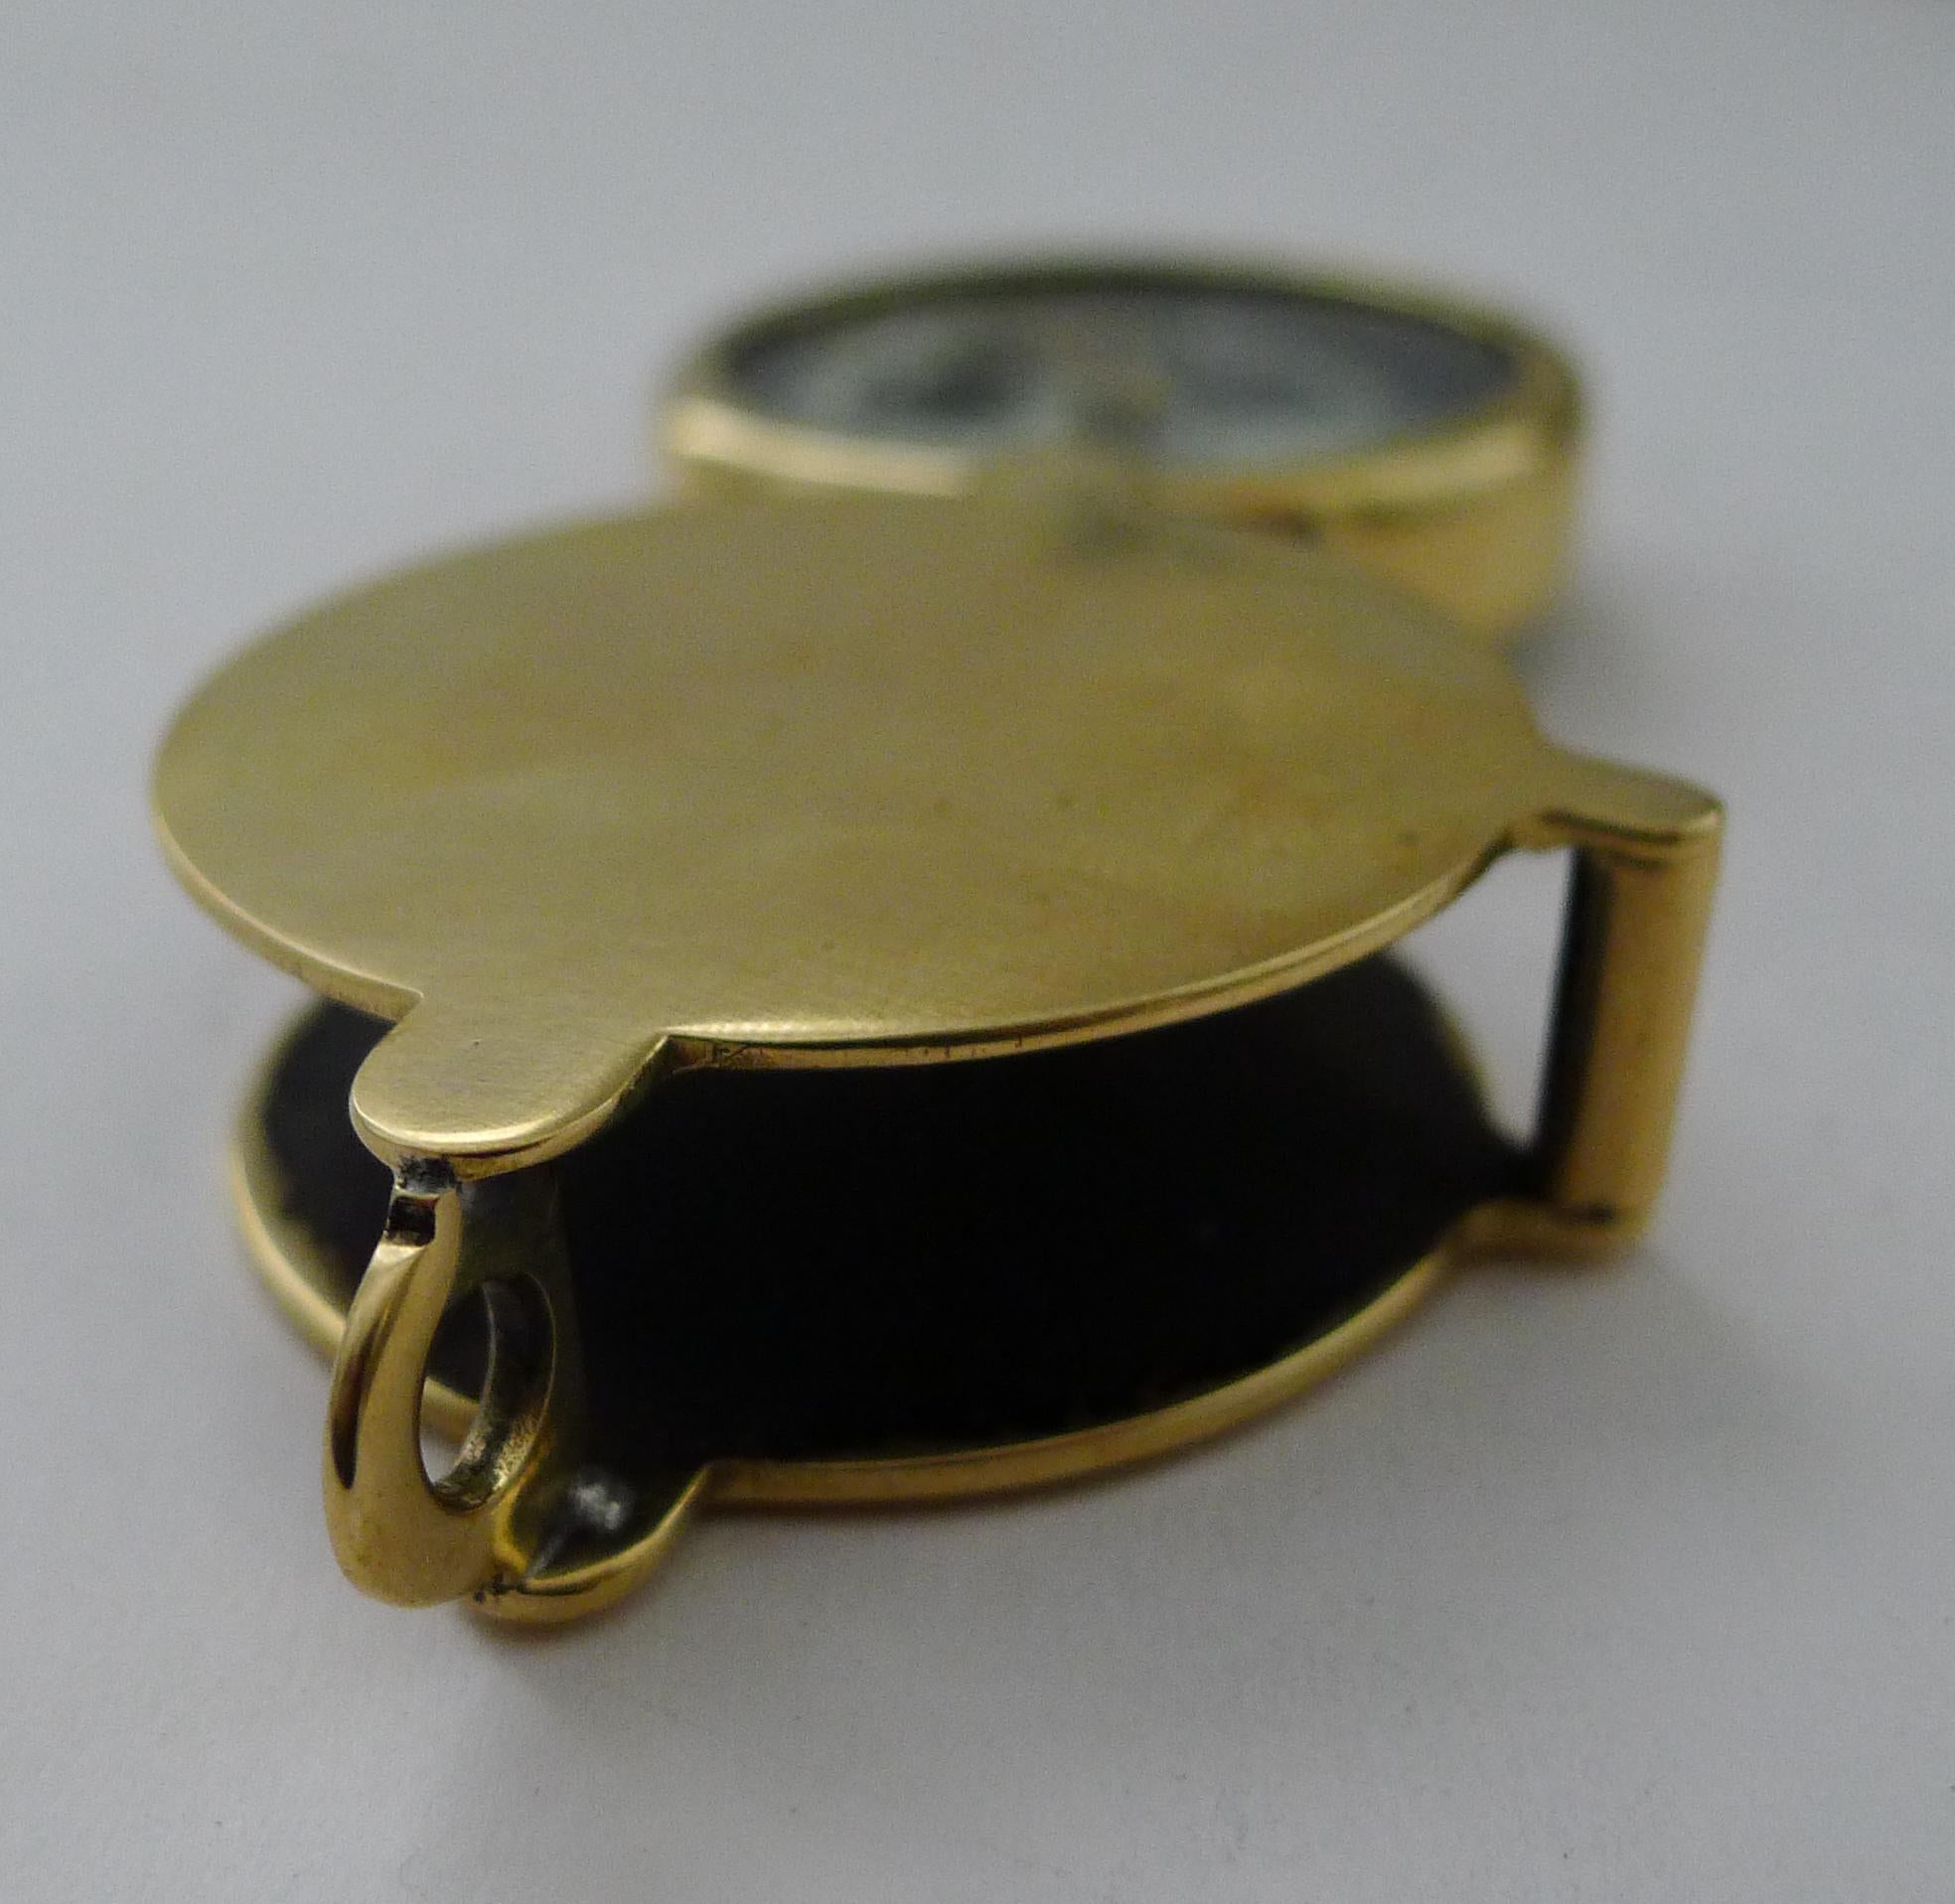 Edwardian Unusual Antique English Folding Compass In Brass Case c.1900 For Sale